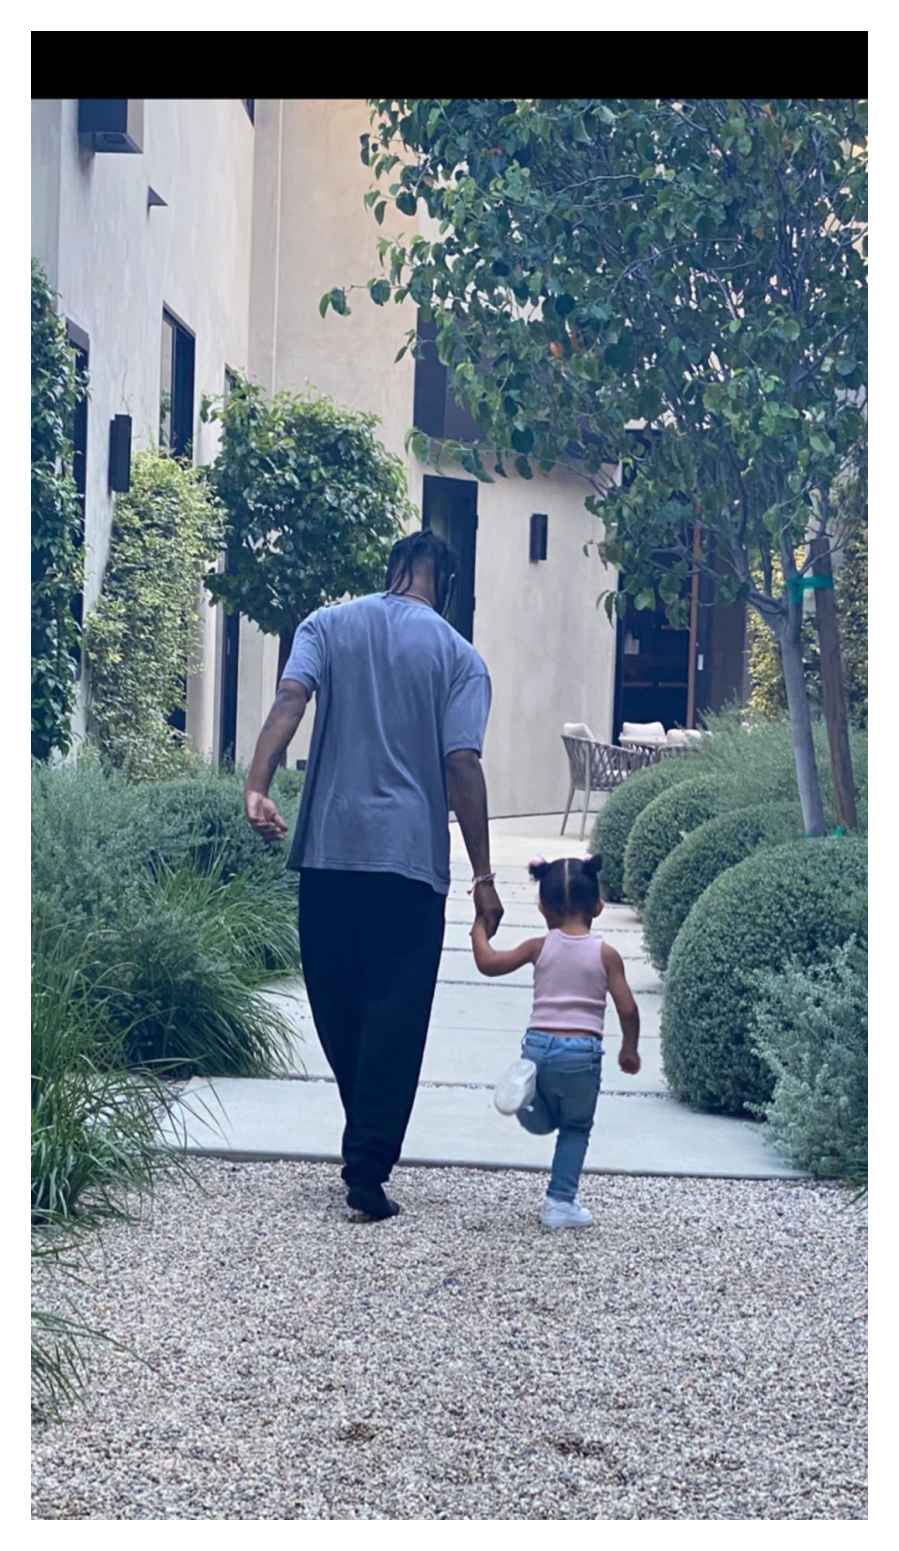 Inside Travis Scott Fathers Day Celebration With Kylie Jenner and Daughter Stormi Instagram